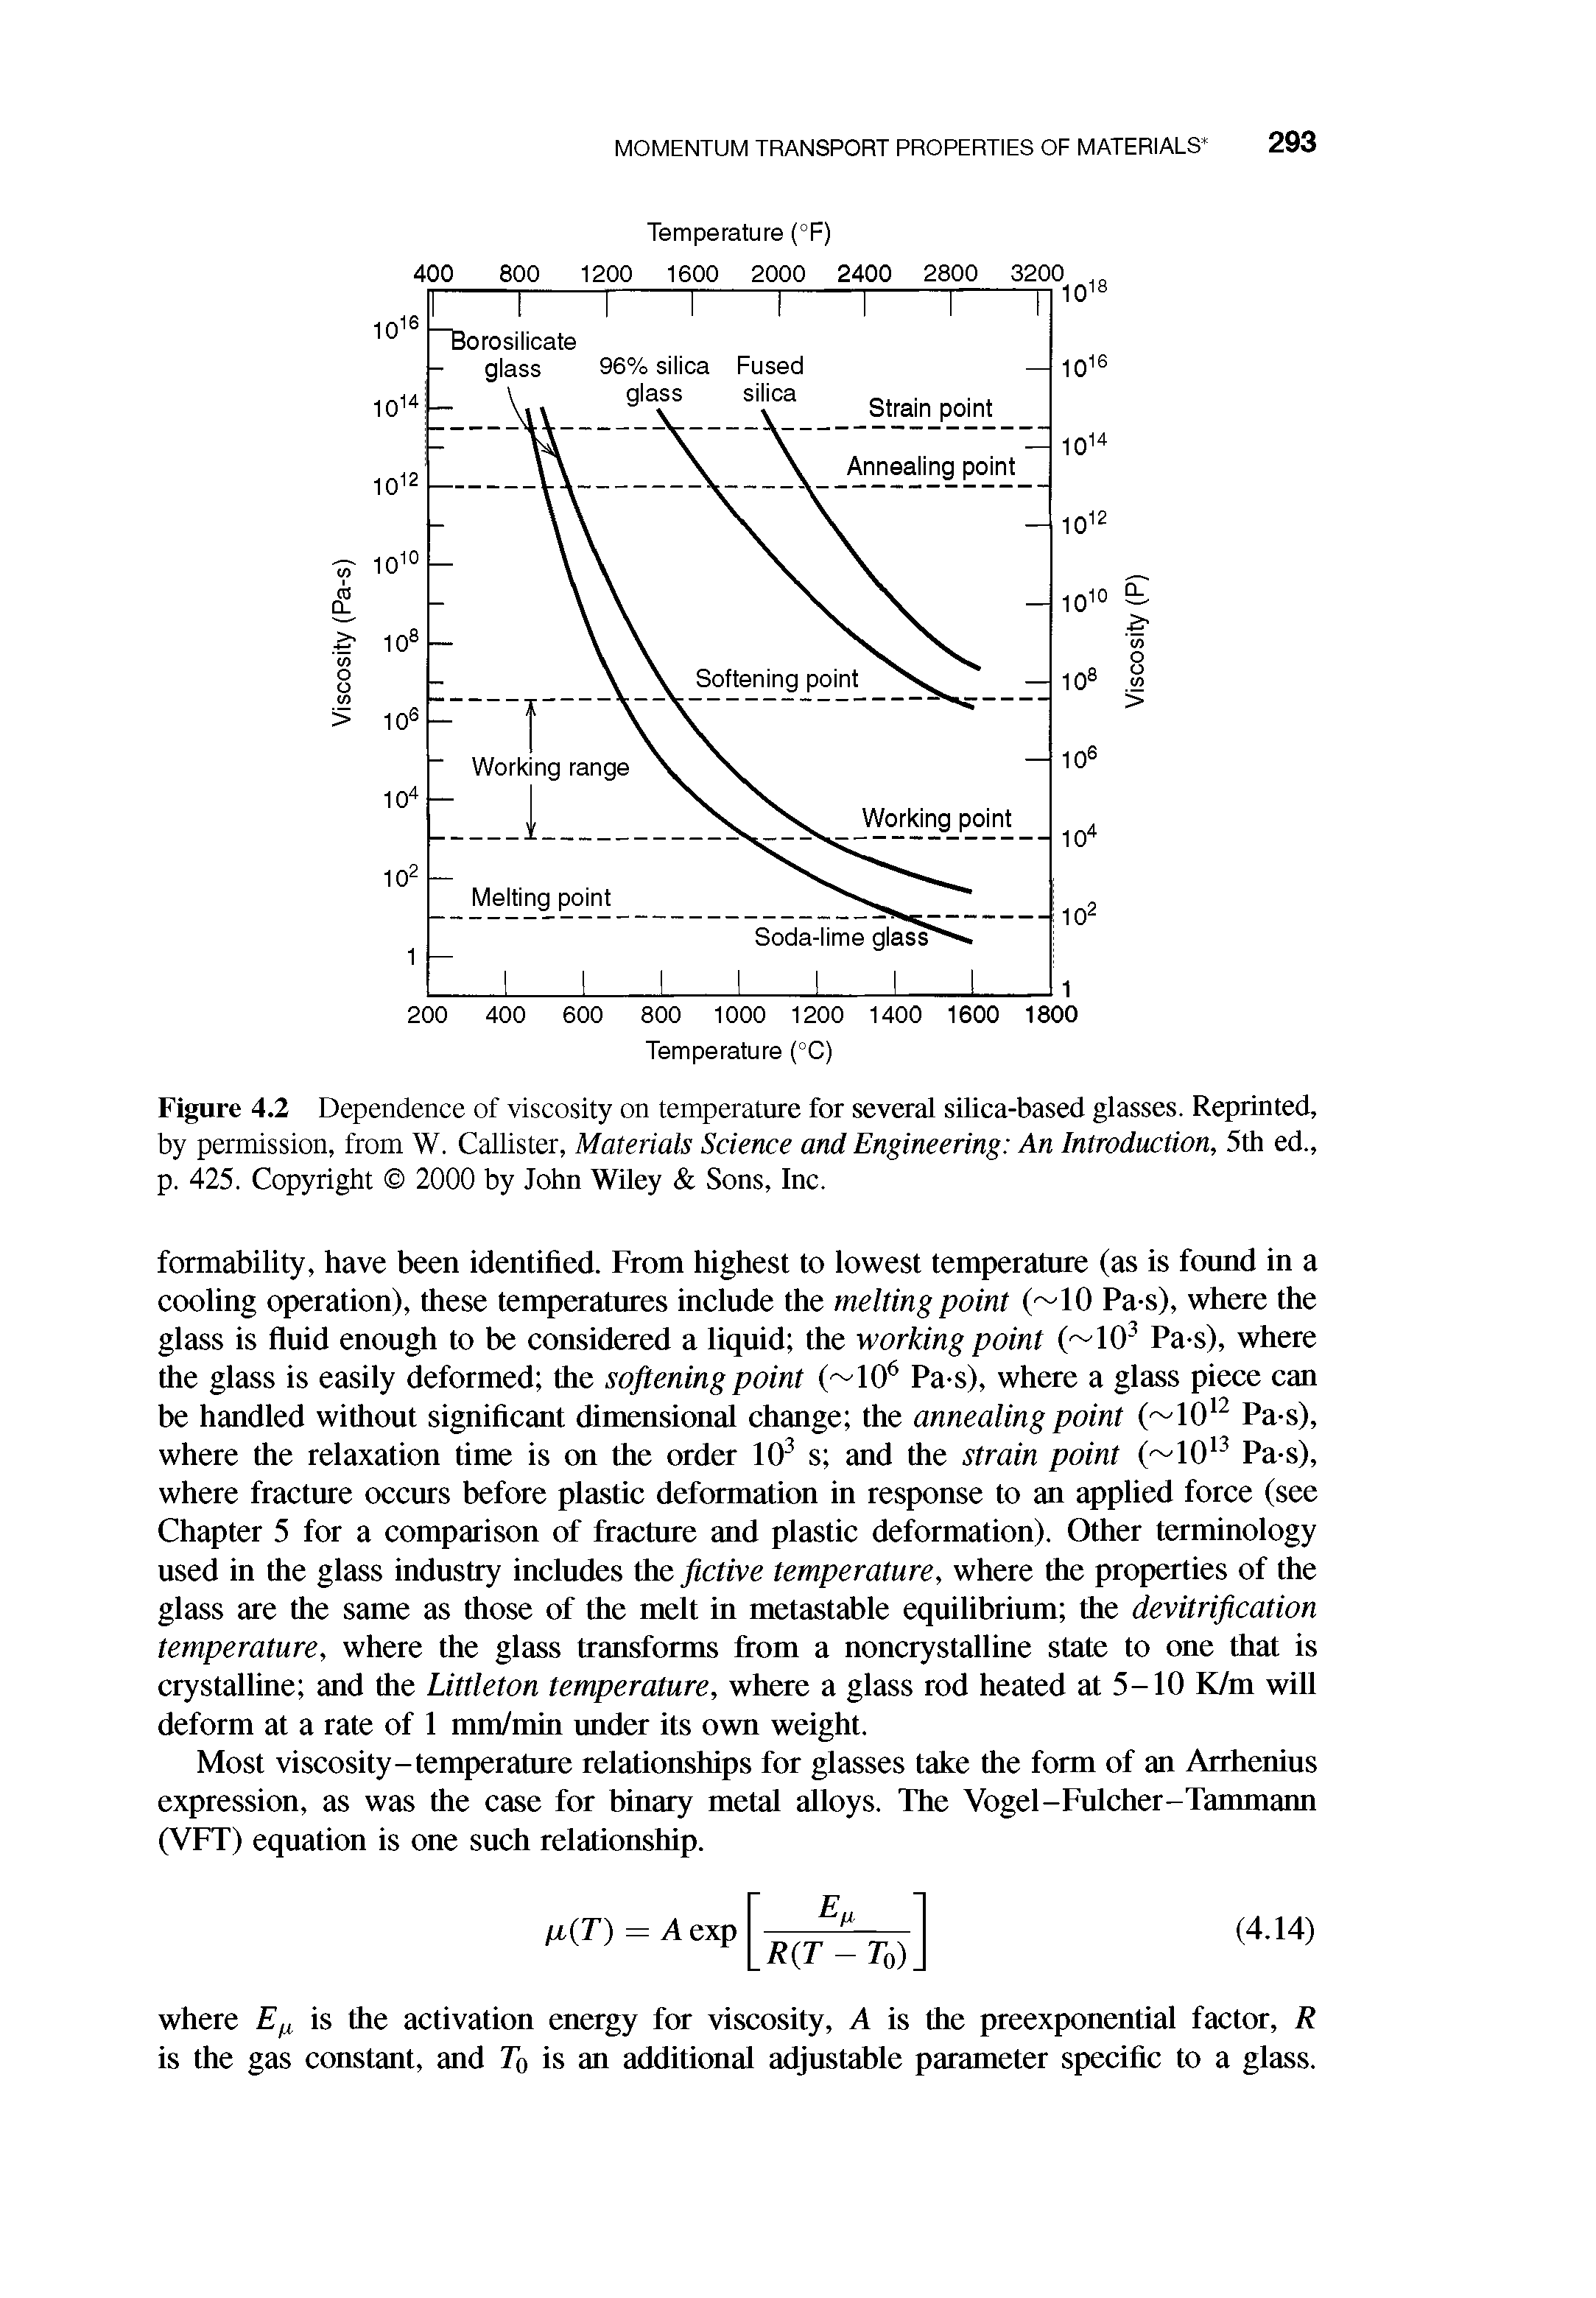 Figure 4.2 Dependence of viscosity on temperature for several silica-based glasses. Reprinted, by permission, from W. Callister, Materials Science and Engineering An Introduction, 5th ed., p. 425. Copyright 2000 by John Wiley Sons, Inc.